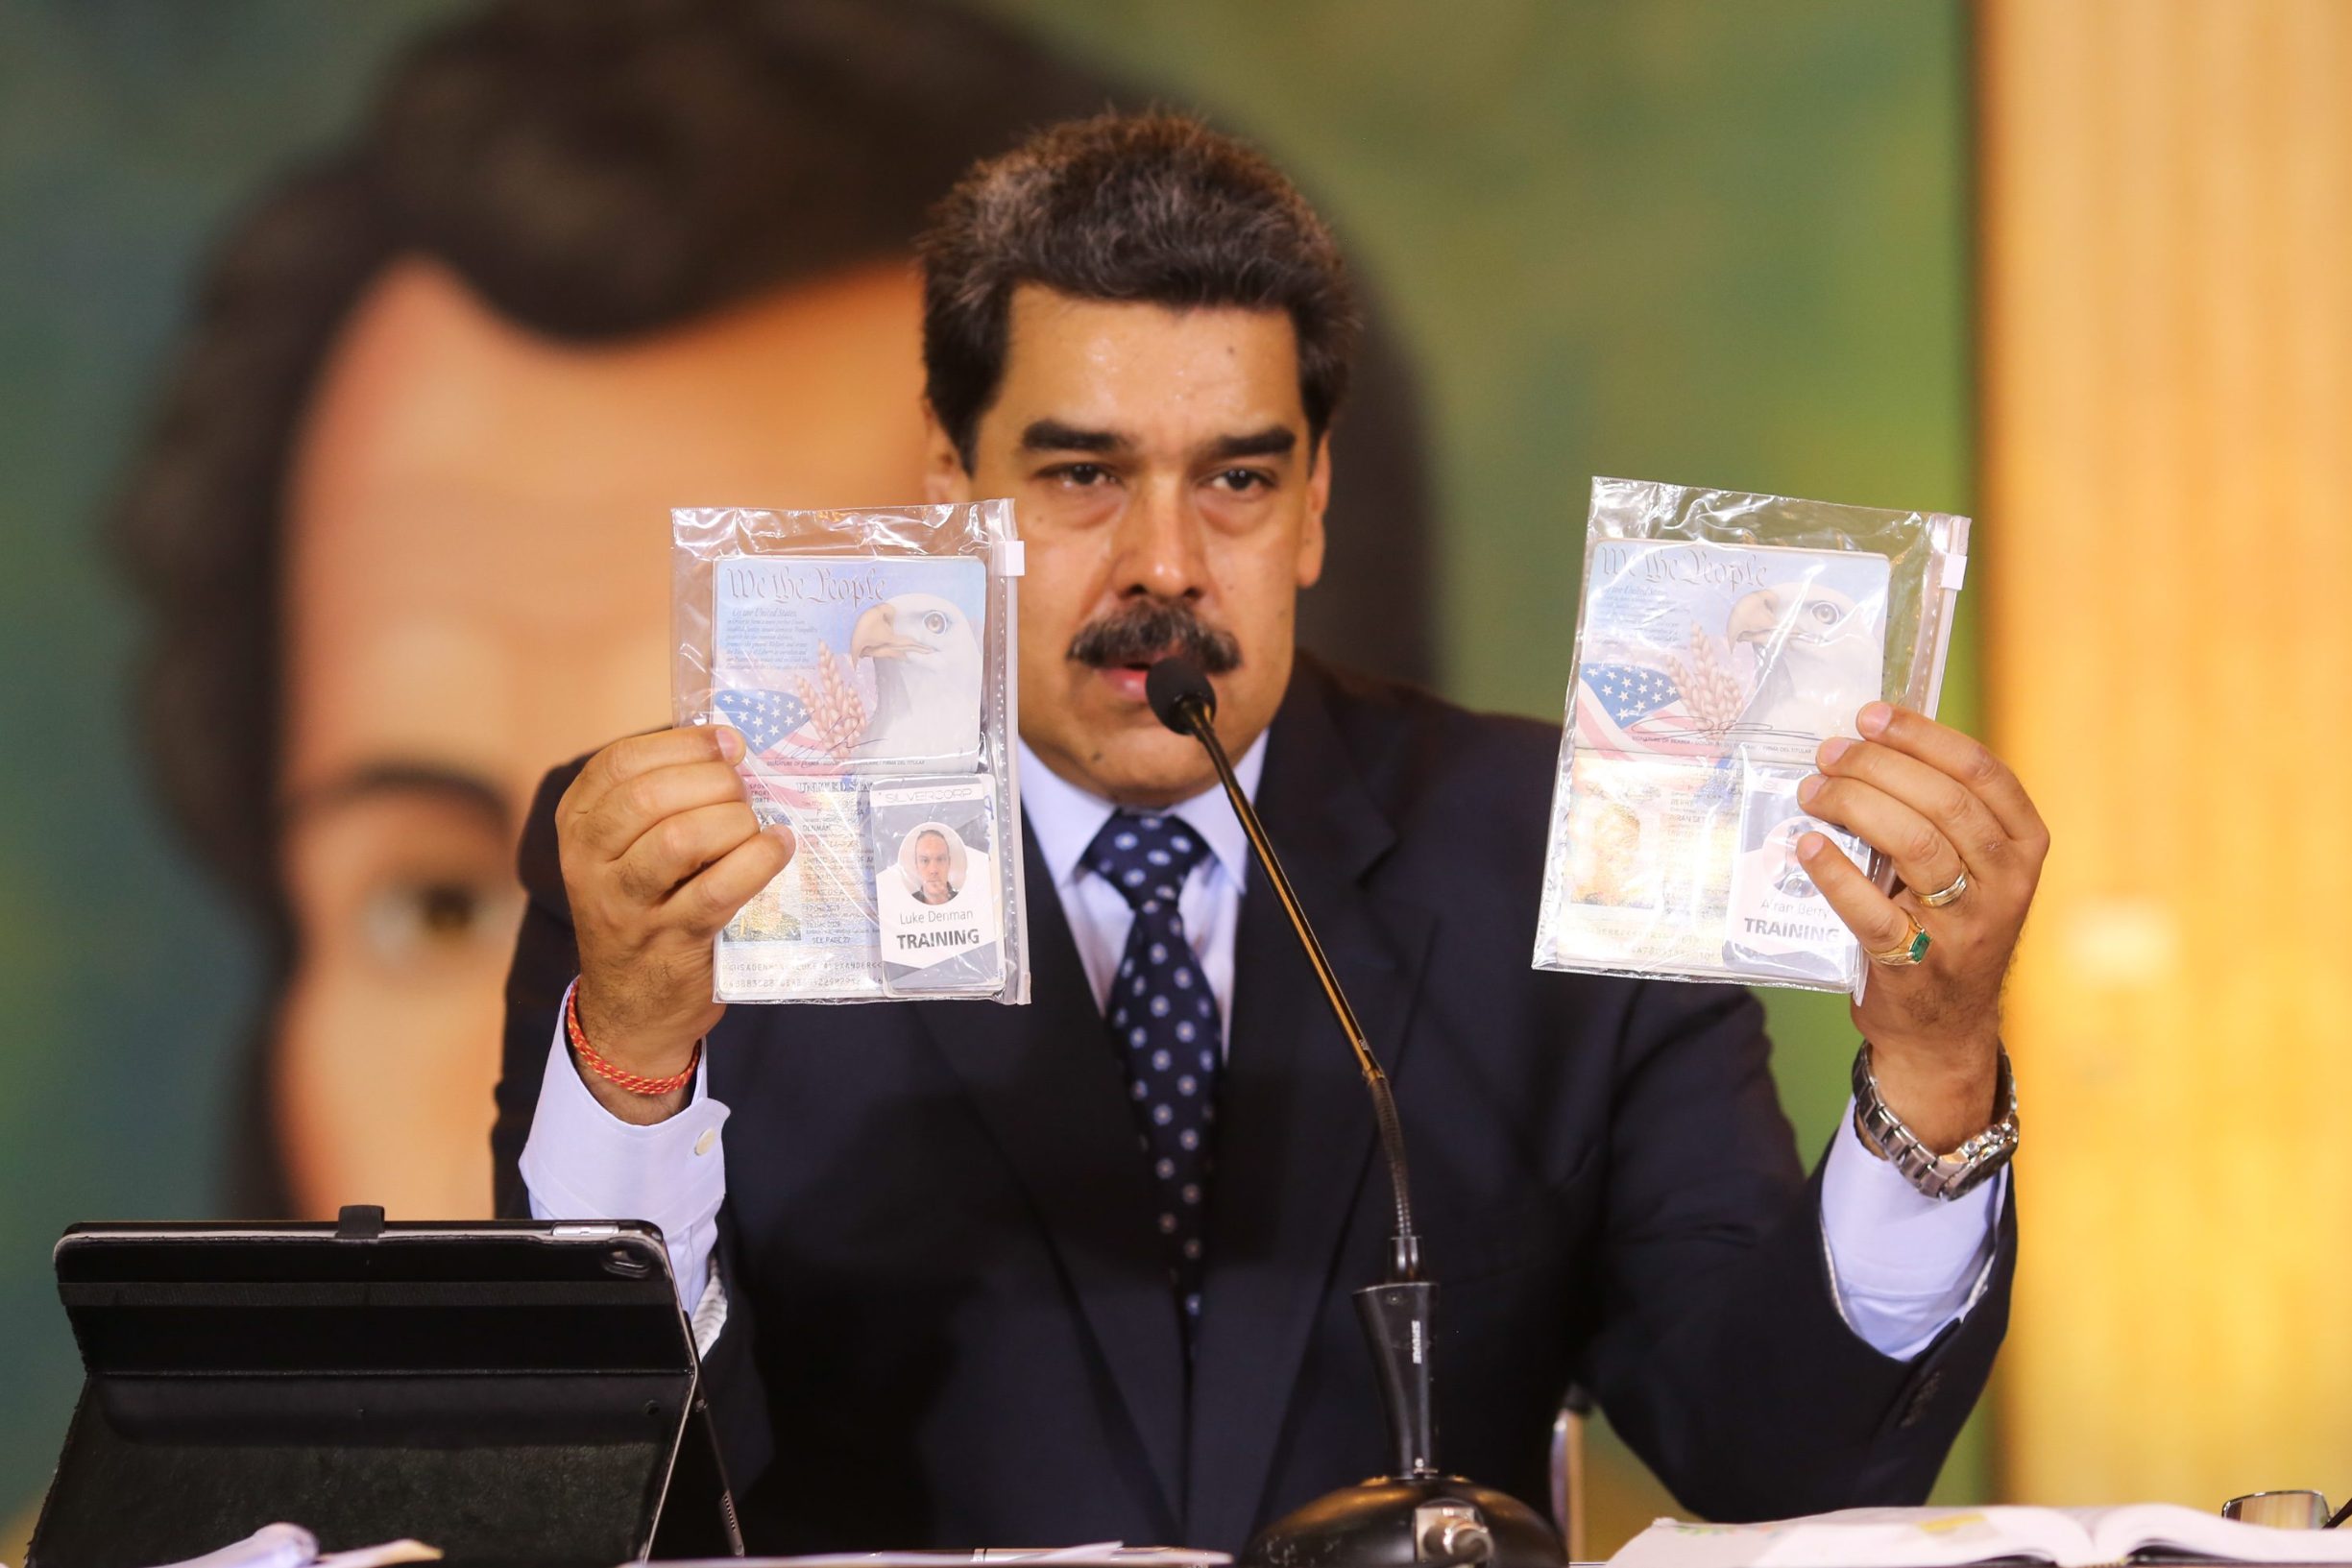 Handout picture released by the Venezuelan Presidency of Venezuelan President Nicolas Maduro showing the passports of two US citizens arrested by security forces during a video conference meeting with international media correspondents, at Miraflores Presidential Palace in Caracas, on May 6, 2020. - Venezuela is to try two Americans allegedly captured during a failed sea attack by mercenaries, President Nicolas Maduro said on Wednesday. (Photo by Marcelo Garcia / Venezuelan Presidency / AFP) / RESTRICTED TO EDITORIAL USE - MANDATORY CREDIT 